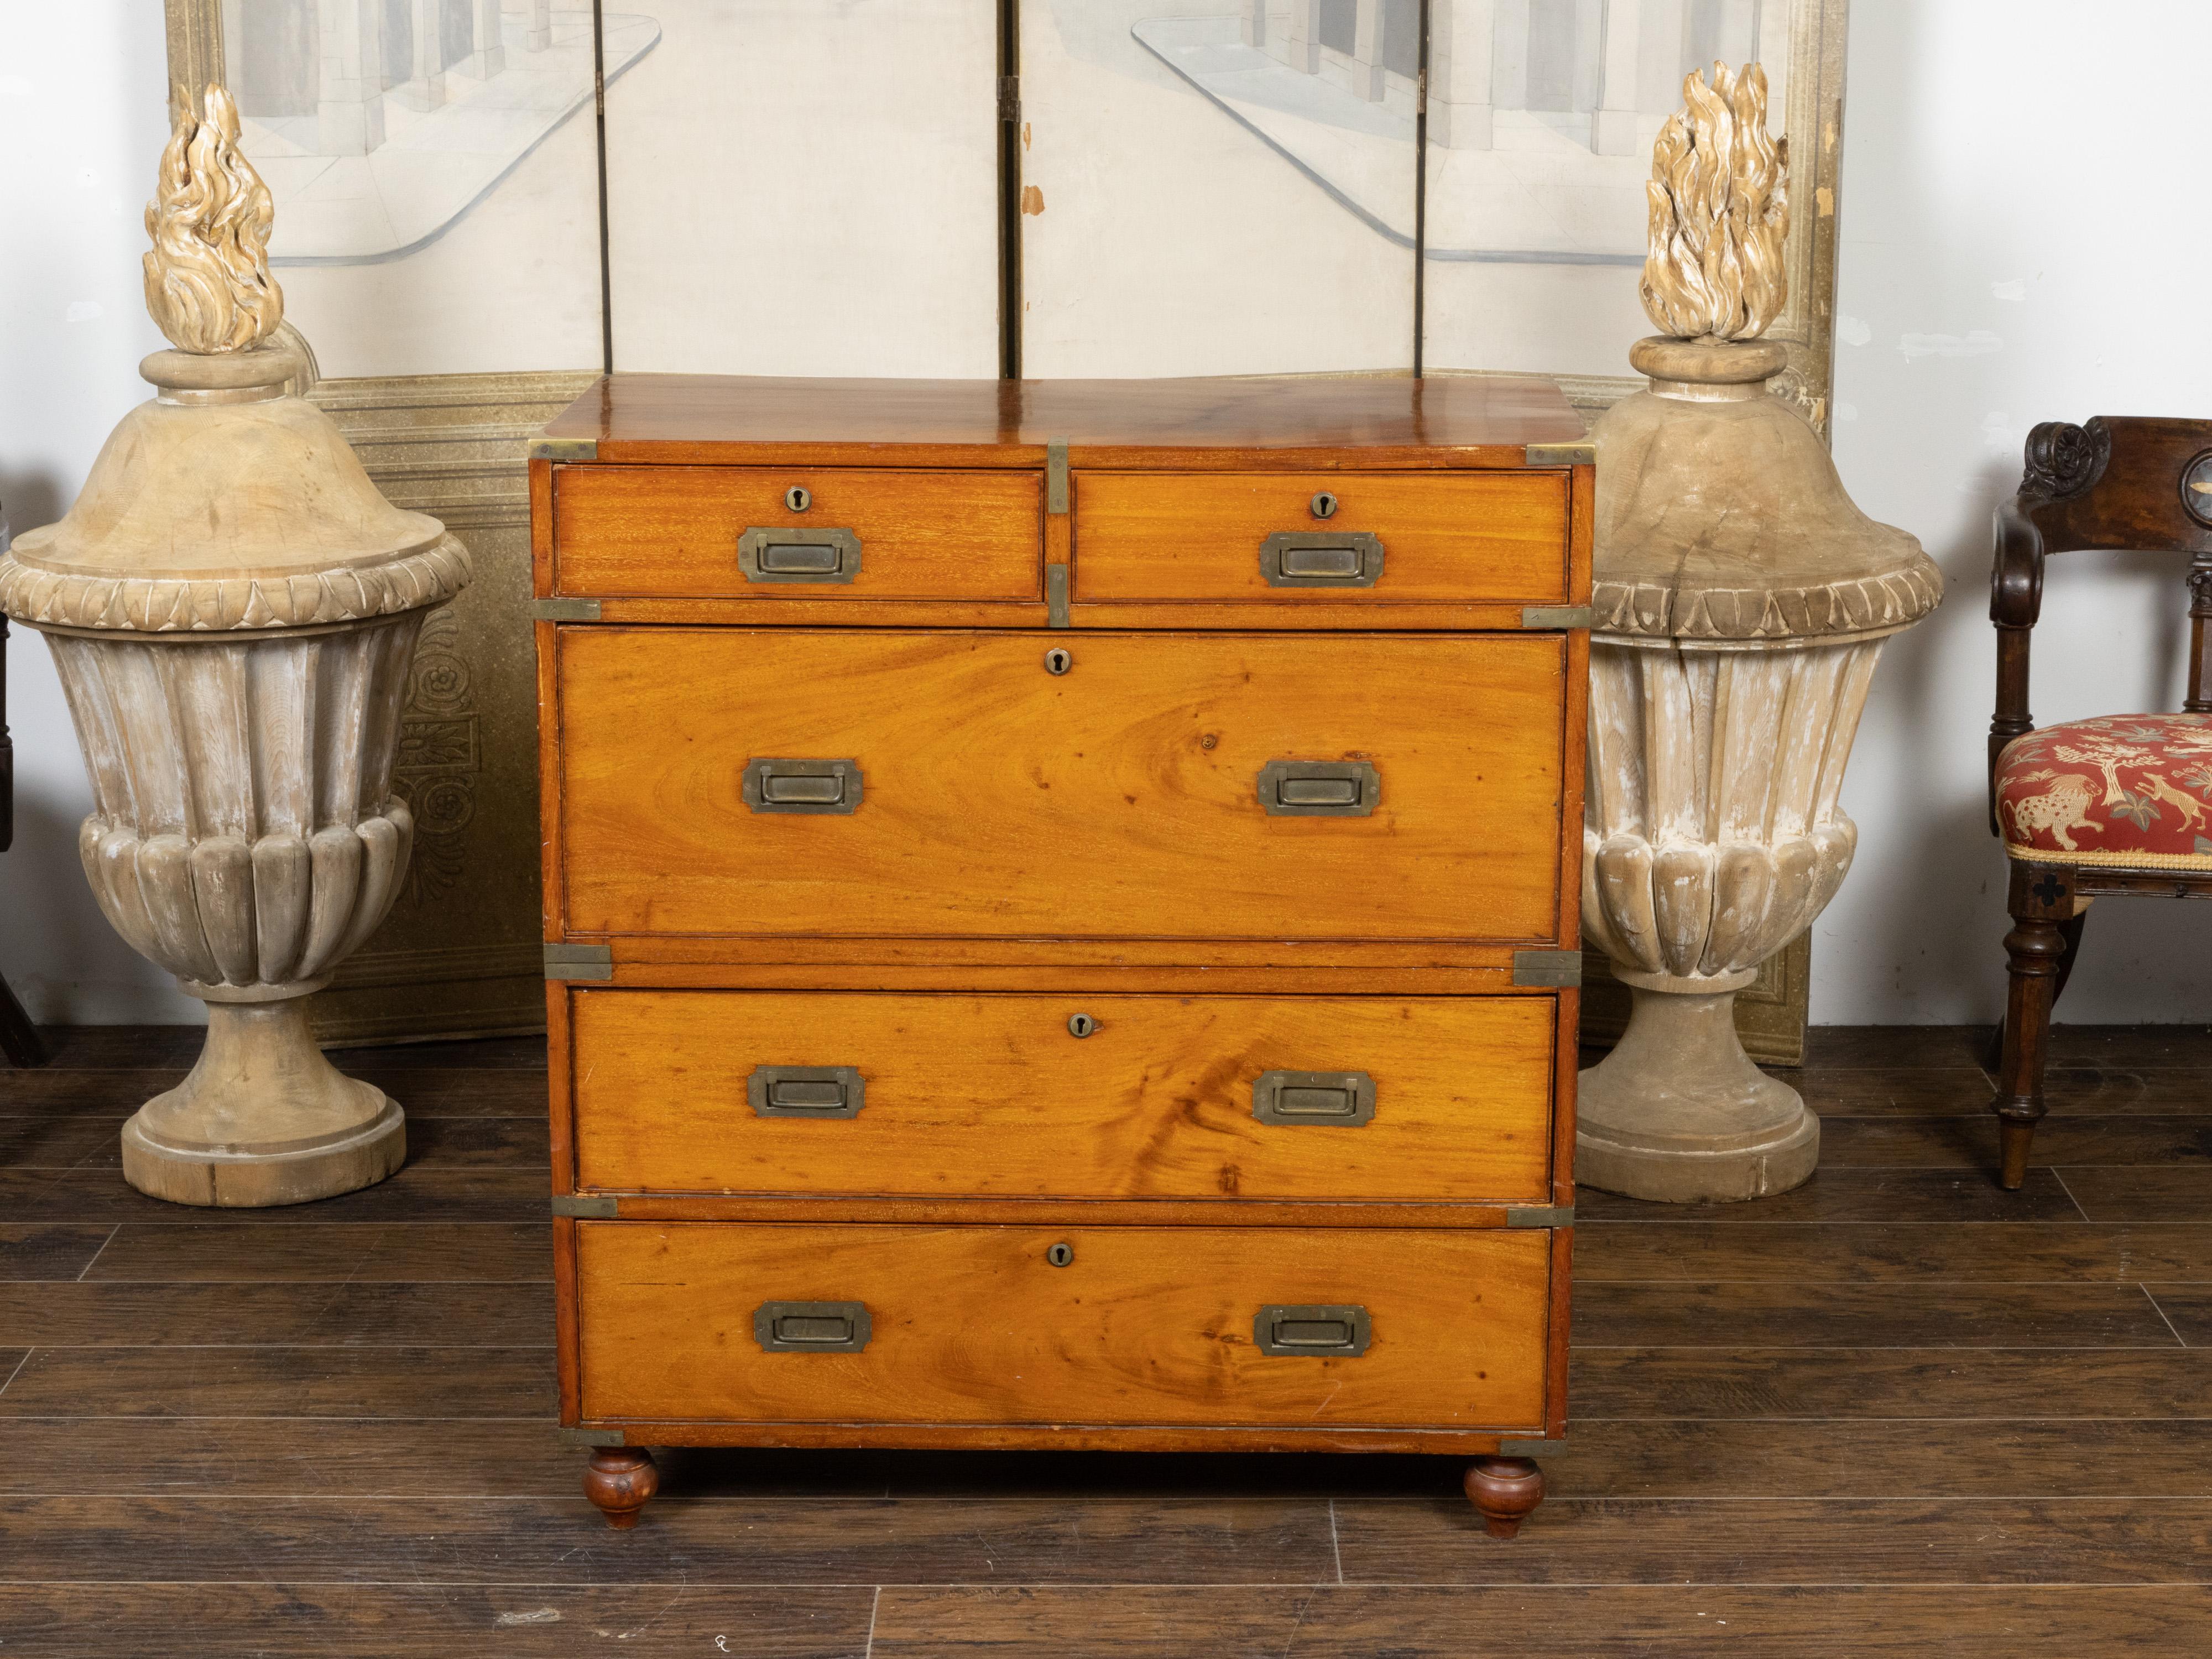 An English teak wood two-part campaign chest from the 19th century, with five drawers, inset brass hardware and turnip feet. Created in England during the 19th century, this teak (a very sturdy wood) campaign chest is made of two parts stacked on